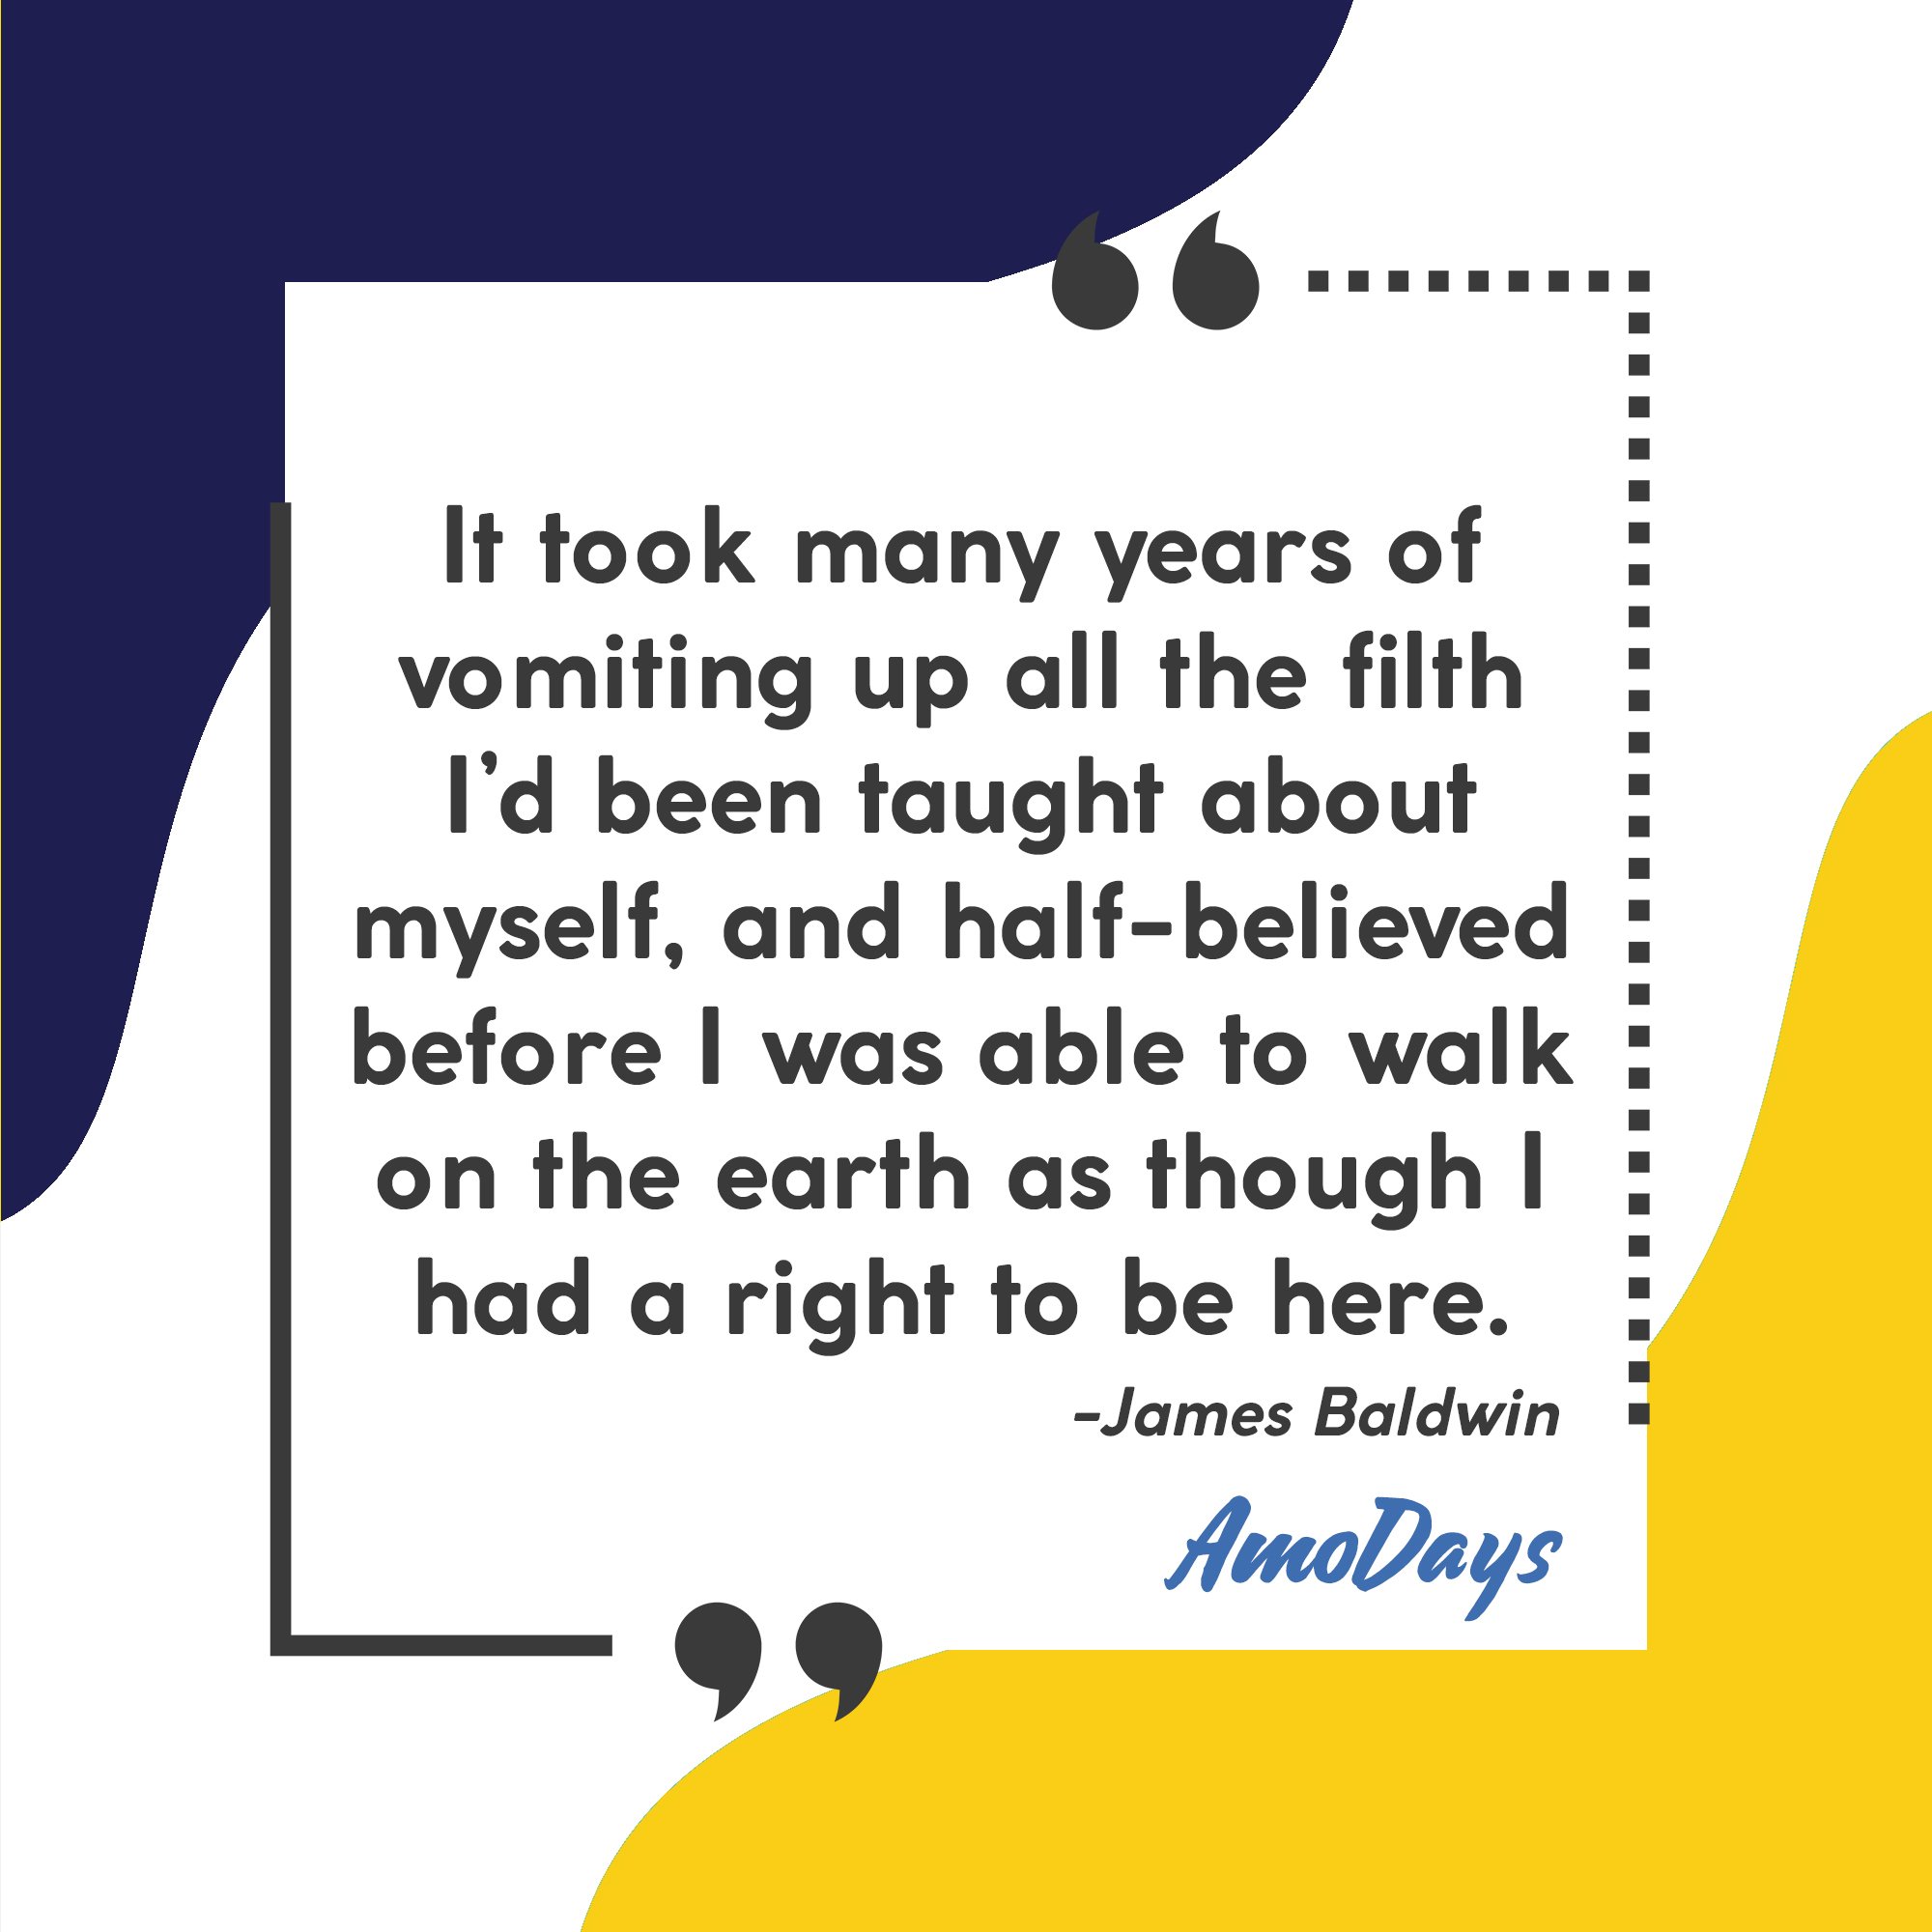 James Baldwin's quote “It took many years of vomiting up all the filth I’d been taught about myself and half-believed before I was able to walk on the earth as though I had a right to be here.” Image: AmoDays